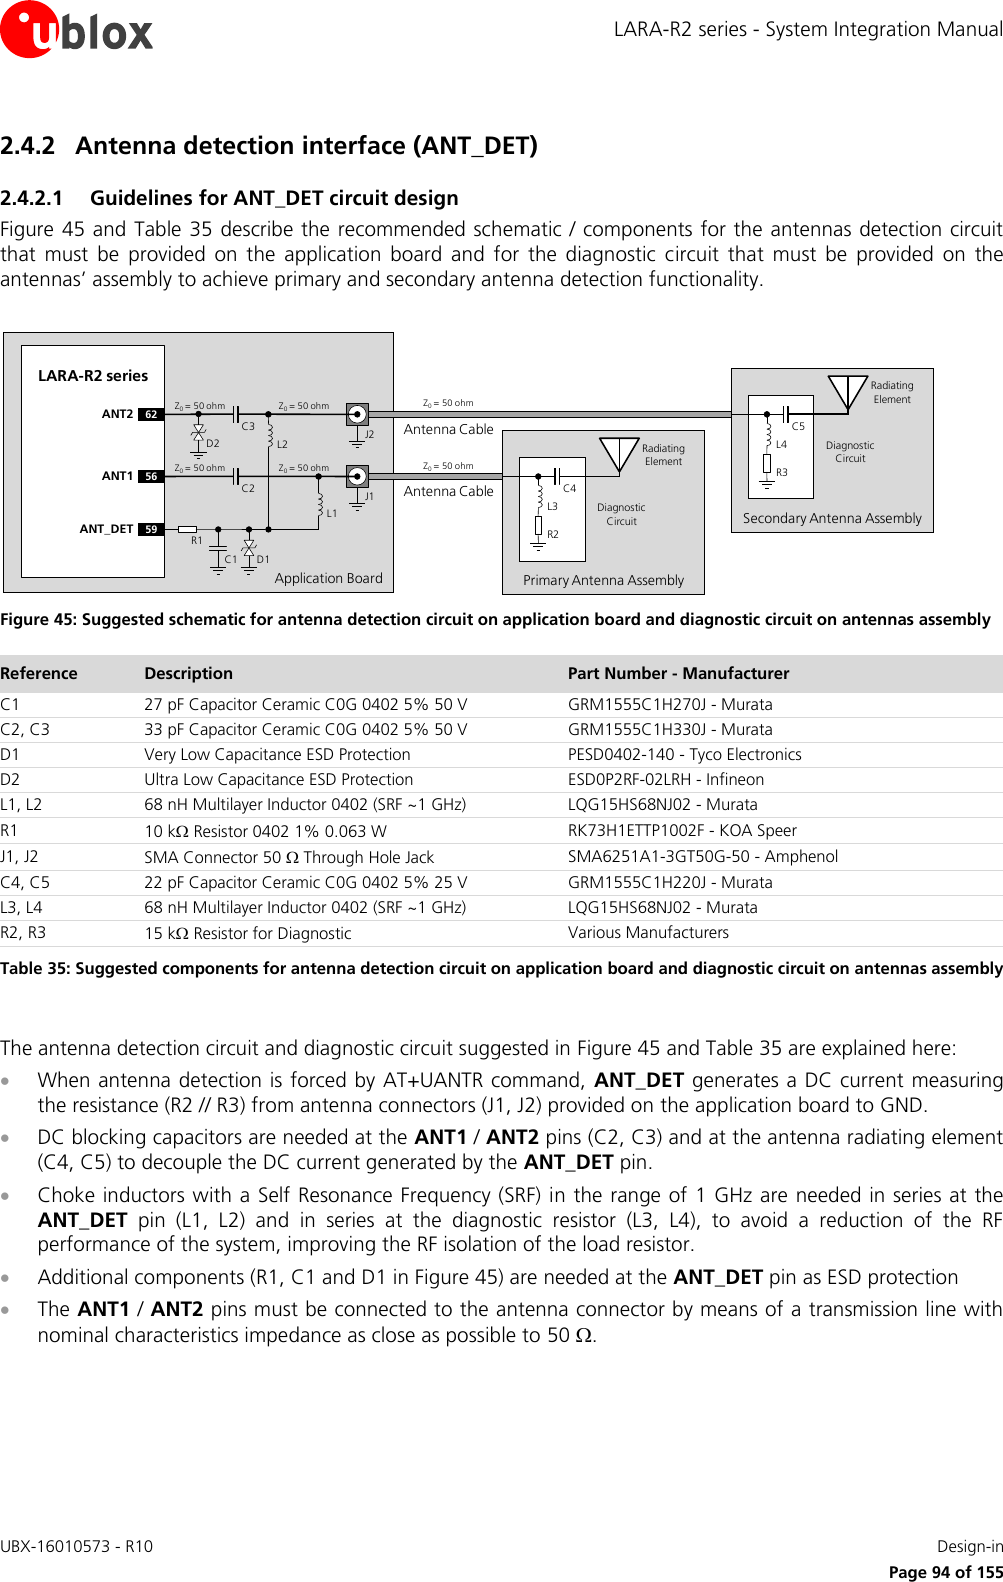 LARA-R2 series - System Integration Manual UBX-16010573 - R10    Design-in     Page 94 of 155 2.4.2 Antenna detection interface (ANT_DET) 2.4.2.1 Guidelines for ANT_DET circuit design Figure 45 and Table 35  describe the recommended schematic / components for the antennas detection circuit that  must  be  provided  on  the  application  board  and  for  the  diagnostic  circuit  that  must  be  provided  on  the antennas’ assembly to achieve primary and secondary antenna detection functionality.  Application BoardAntenna CableLARA-R2 series56ANT159ANT_DET R1C1 D1C2 J1Z0= 50 ohm Z0= 50 ohm Z0= 50 ohmPrimary Antenna AssemblyR2C4L3Radiating ElementDiagnostic CircuitL2L1Antenna Cable62ANT2C3 J2Z0= 50 ohm Z0= 50 ohm Z0= 50 ohmSecondary Antenna AssemblyR3C5L4Radiating ElementDiagnostic CircuitD2 Figure 45: Suggested schematic for antenna detection circuit on application board and diagnostic circuit on antennas assembly Reference Description Part Number - Manufacturer C1 27 pF Capacitor Ceramic C0G 0402 5% 50 V GRM1555C1H270J - Murata C2, C3 33 pF Capacitor Ceramic C0G 0402 5% 50 V GRM1555C1H330J - Murata D1 Very Low Capacitance ESD Protection PESD0402-140 - Tyco Electronics D2 Ultra Low Capacitance ESD Protection ESD0P2RF-02LRH - Infineon  L1, L2 68 nH Multilayer Inductor 0402 (SRF ~1 GHz) LQG15HS68NJ02 - Murata R1 10 k Resistor 0402 1% 0.063 W RK73H1ETTP1002F - KOA Speer J1, J2 SMA Connector 50  Through Hole Jack SMA6251A1-3GT50G-50 - Amphenol C4, C5 22 pF Capacitor Ceramic C0G 0402 5% 25 V  GRM1555C1H220J - Murata L3, L4 68 nH Multilayer Inductor 0402 (SRF ~1 GHz) LQG15HS68NJ02 - Murata R2, R3 15 k Resistor for Diagnostic Various Manufacturers Table 35: Suggested components for antenna detection circuit on application board and diagnostic circuit on antennas assembly  The antenna detection circuit and diagnostic circuit suggested in Figure 45 and Table 35 are explained here:  When antenna detection is forced by AT+UANTR command,  ANT_DET generates a DC current measuring the resistance (R2 // R3) from antenna connectors (J1, J2) provided on the application board to GND.  DC blocking capacitors are needed at the ANT1 / ANT2 pins (C2, C3) and at the antenna radiating element (C4, C5) to decouple the DC current generated by the ANT_DET pin.  Choke inductors with a Self Resonance Frequency (SRF) in the range of 1 GHz are needed in series at the ANT_DET  pin  (L1,  L2)  and  in  series  at  the  diagnostic  resistor  (L3,  L4),  to  avoid  a  reduction  of  the  RF performance of the system, improving the RF isolation of the load resistor.   Additional components (R1, C1 and D1 in Figure 45) are needed at the ANT_DET pin as ESD protection  The ANT1 / ANT2 pins must be connected to the antenna connector by means of a transmission line with nominal characteristics impedance as close as possible to 50 .  